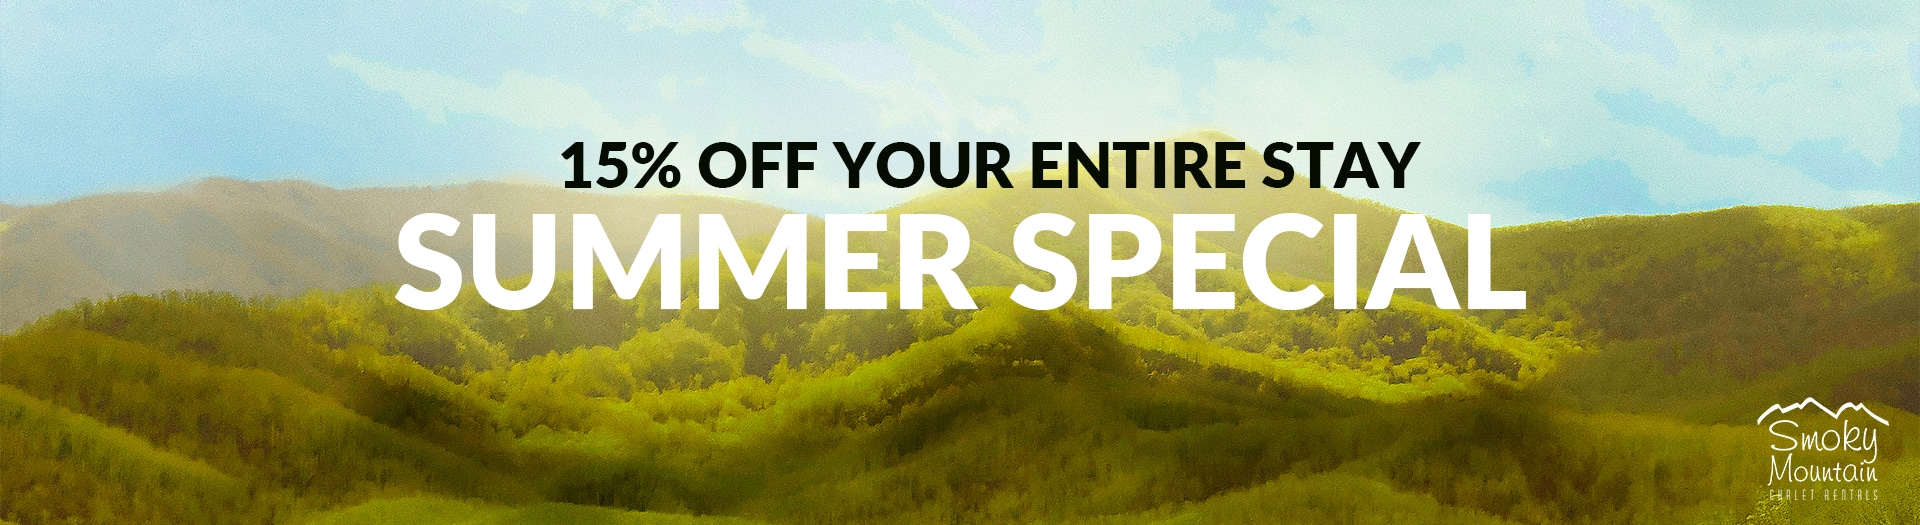 15% off your entire stay summer special